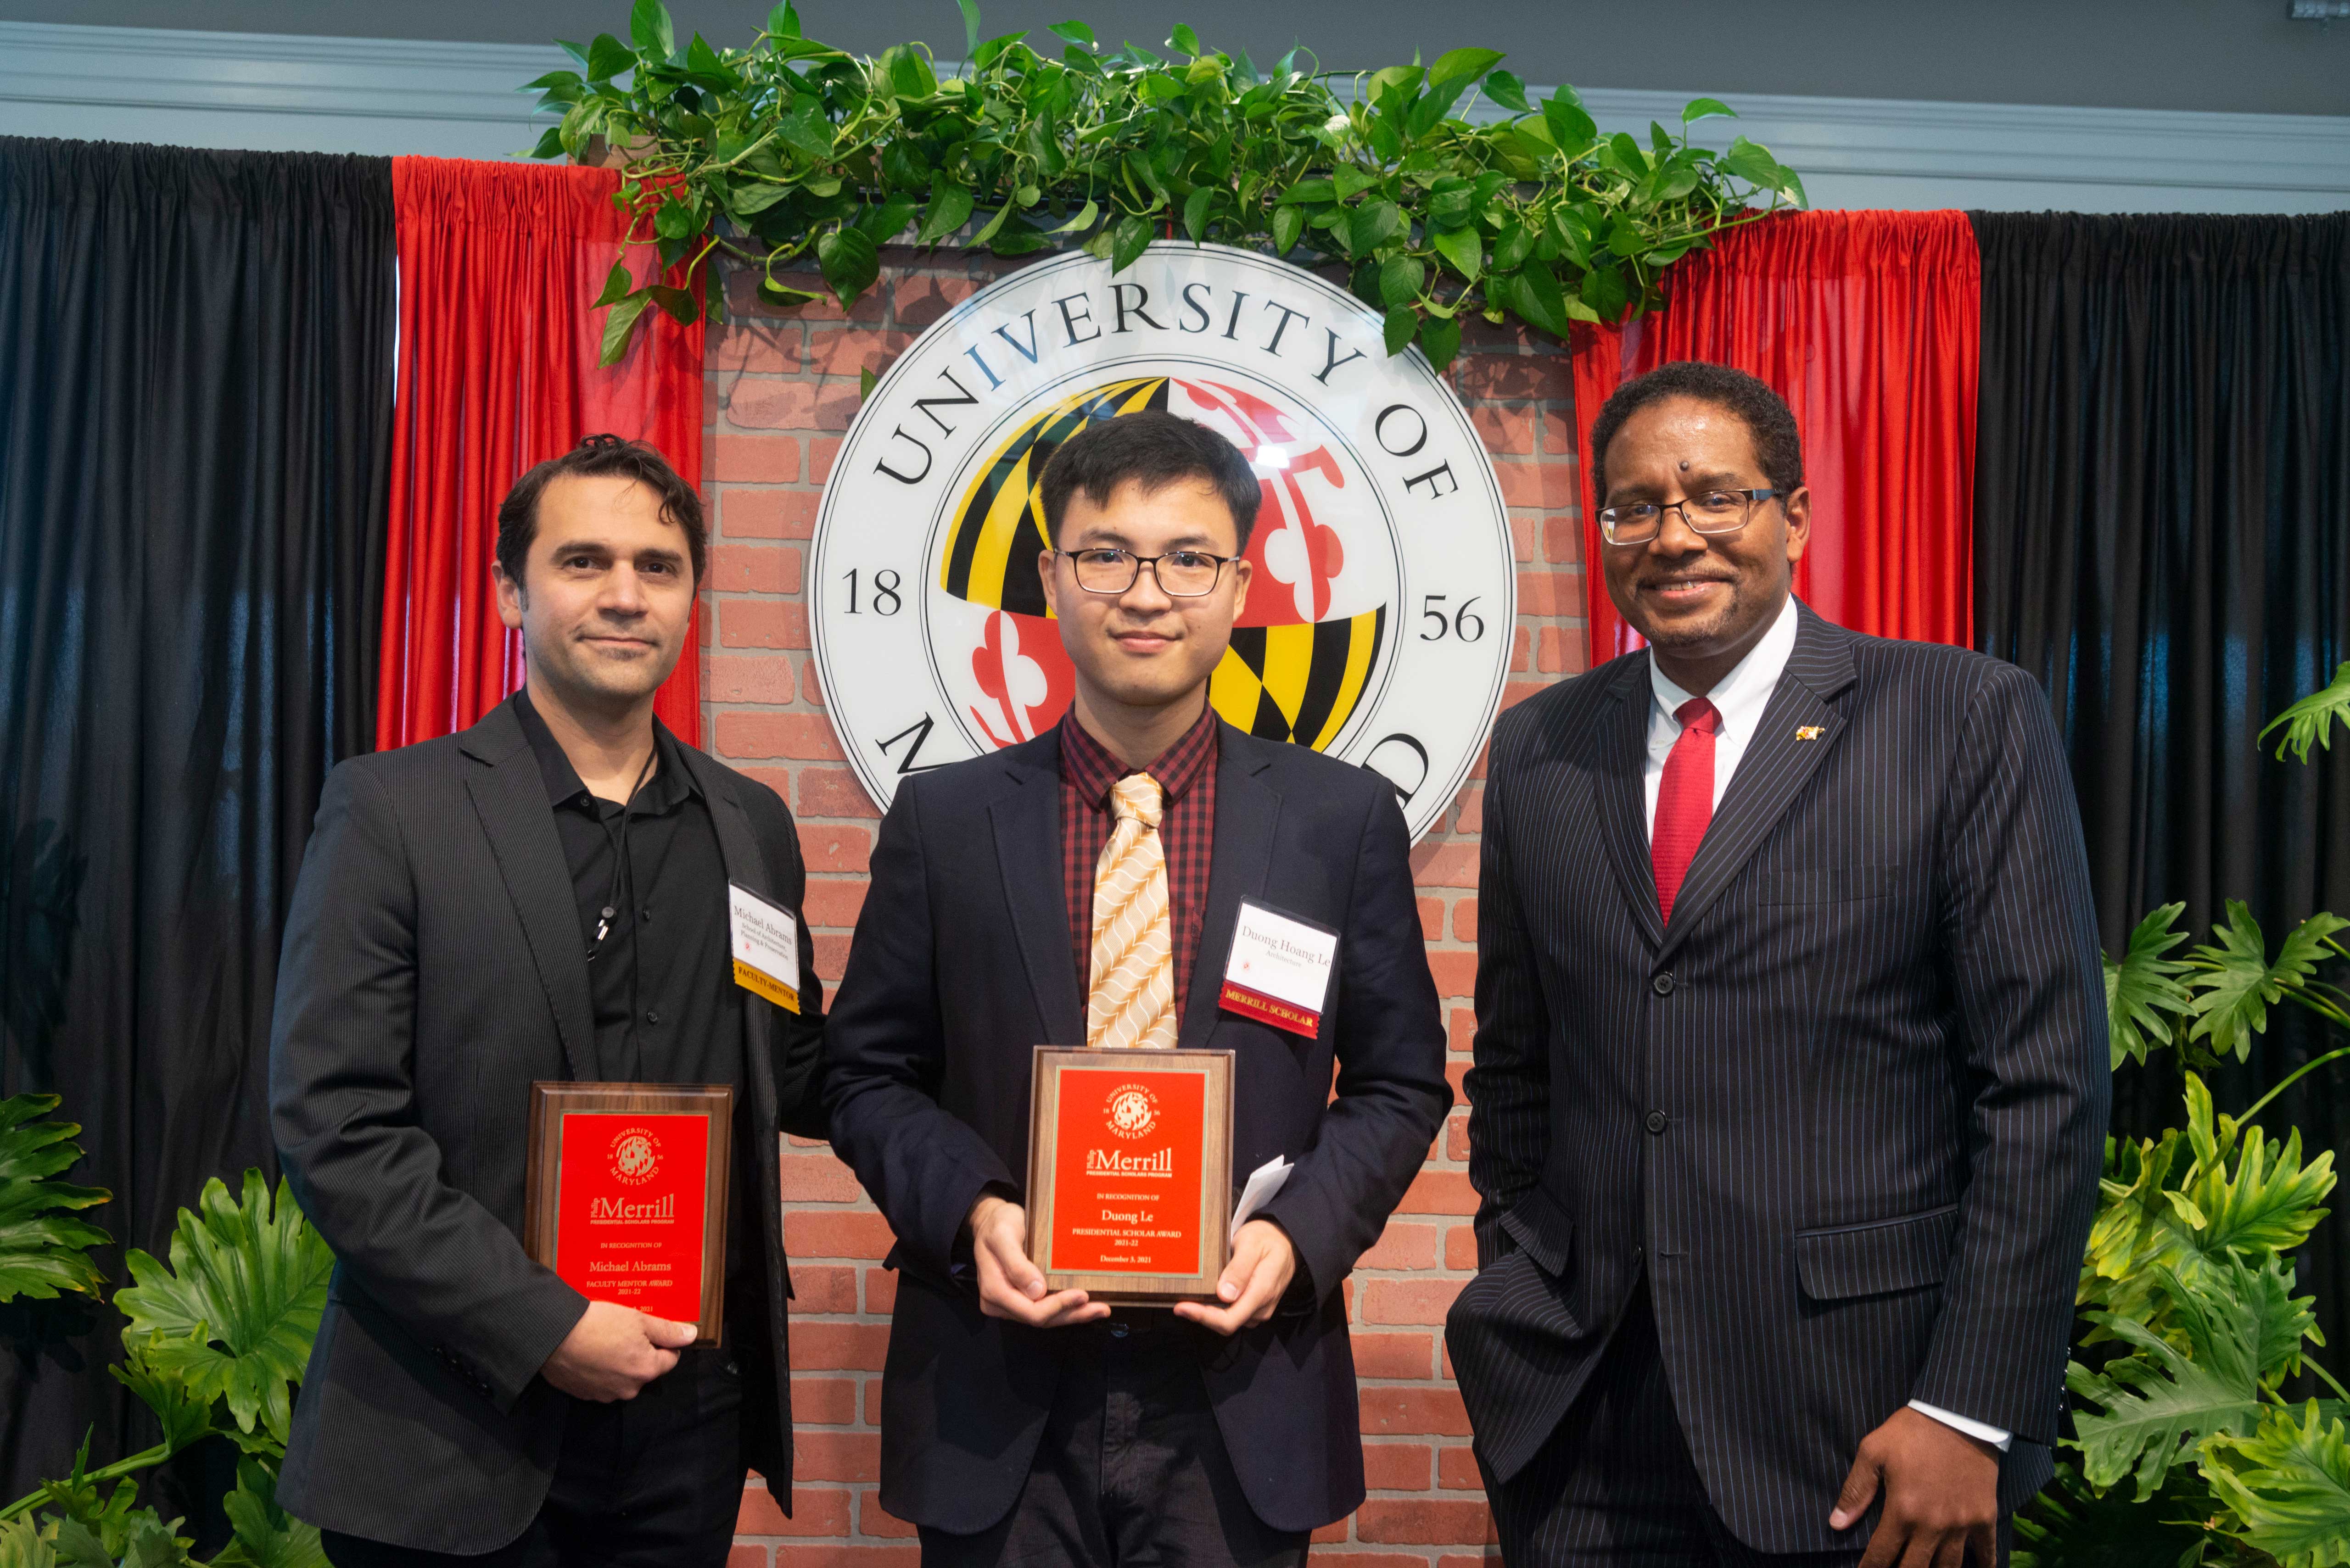 Merrill Scholar Duong Le and President Pines